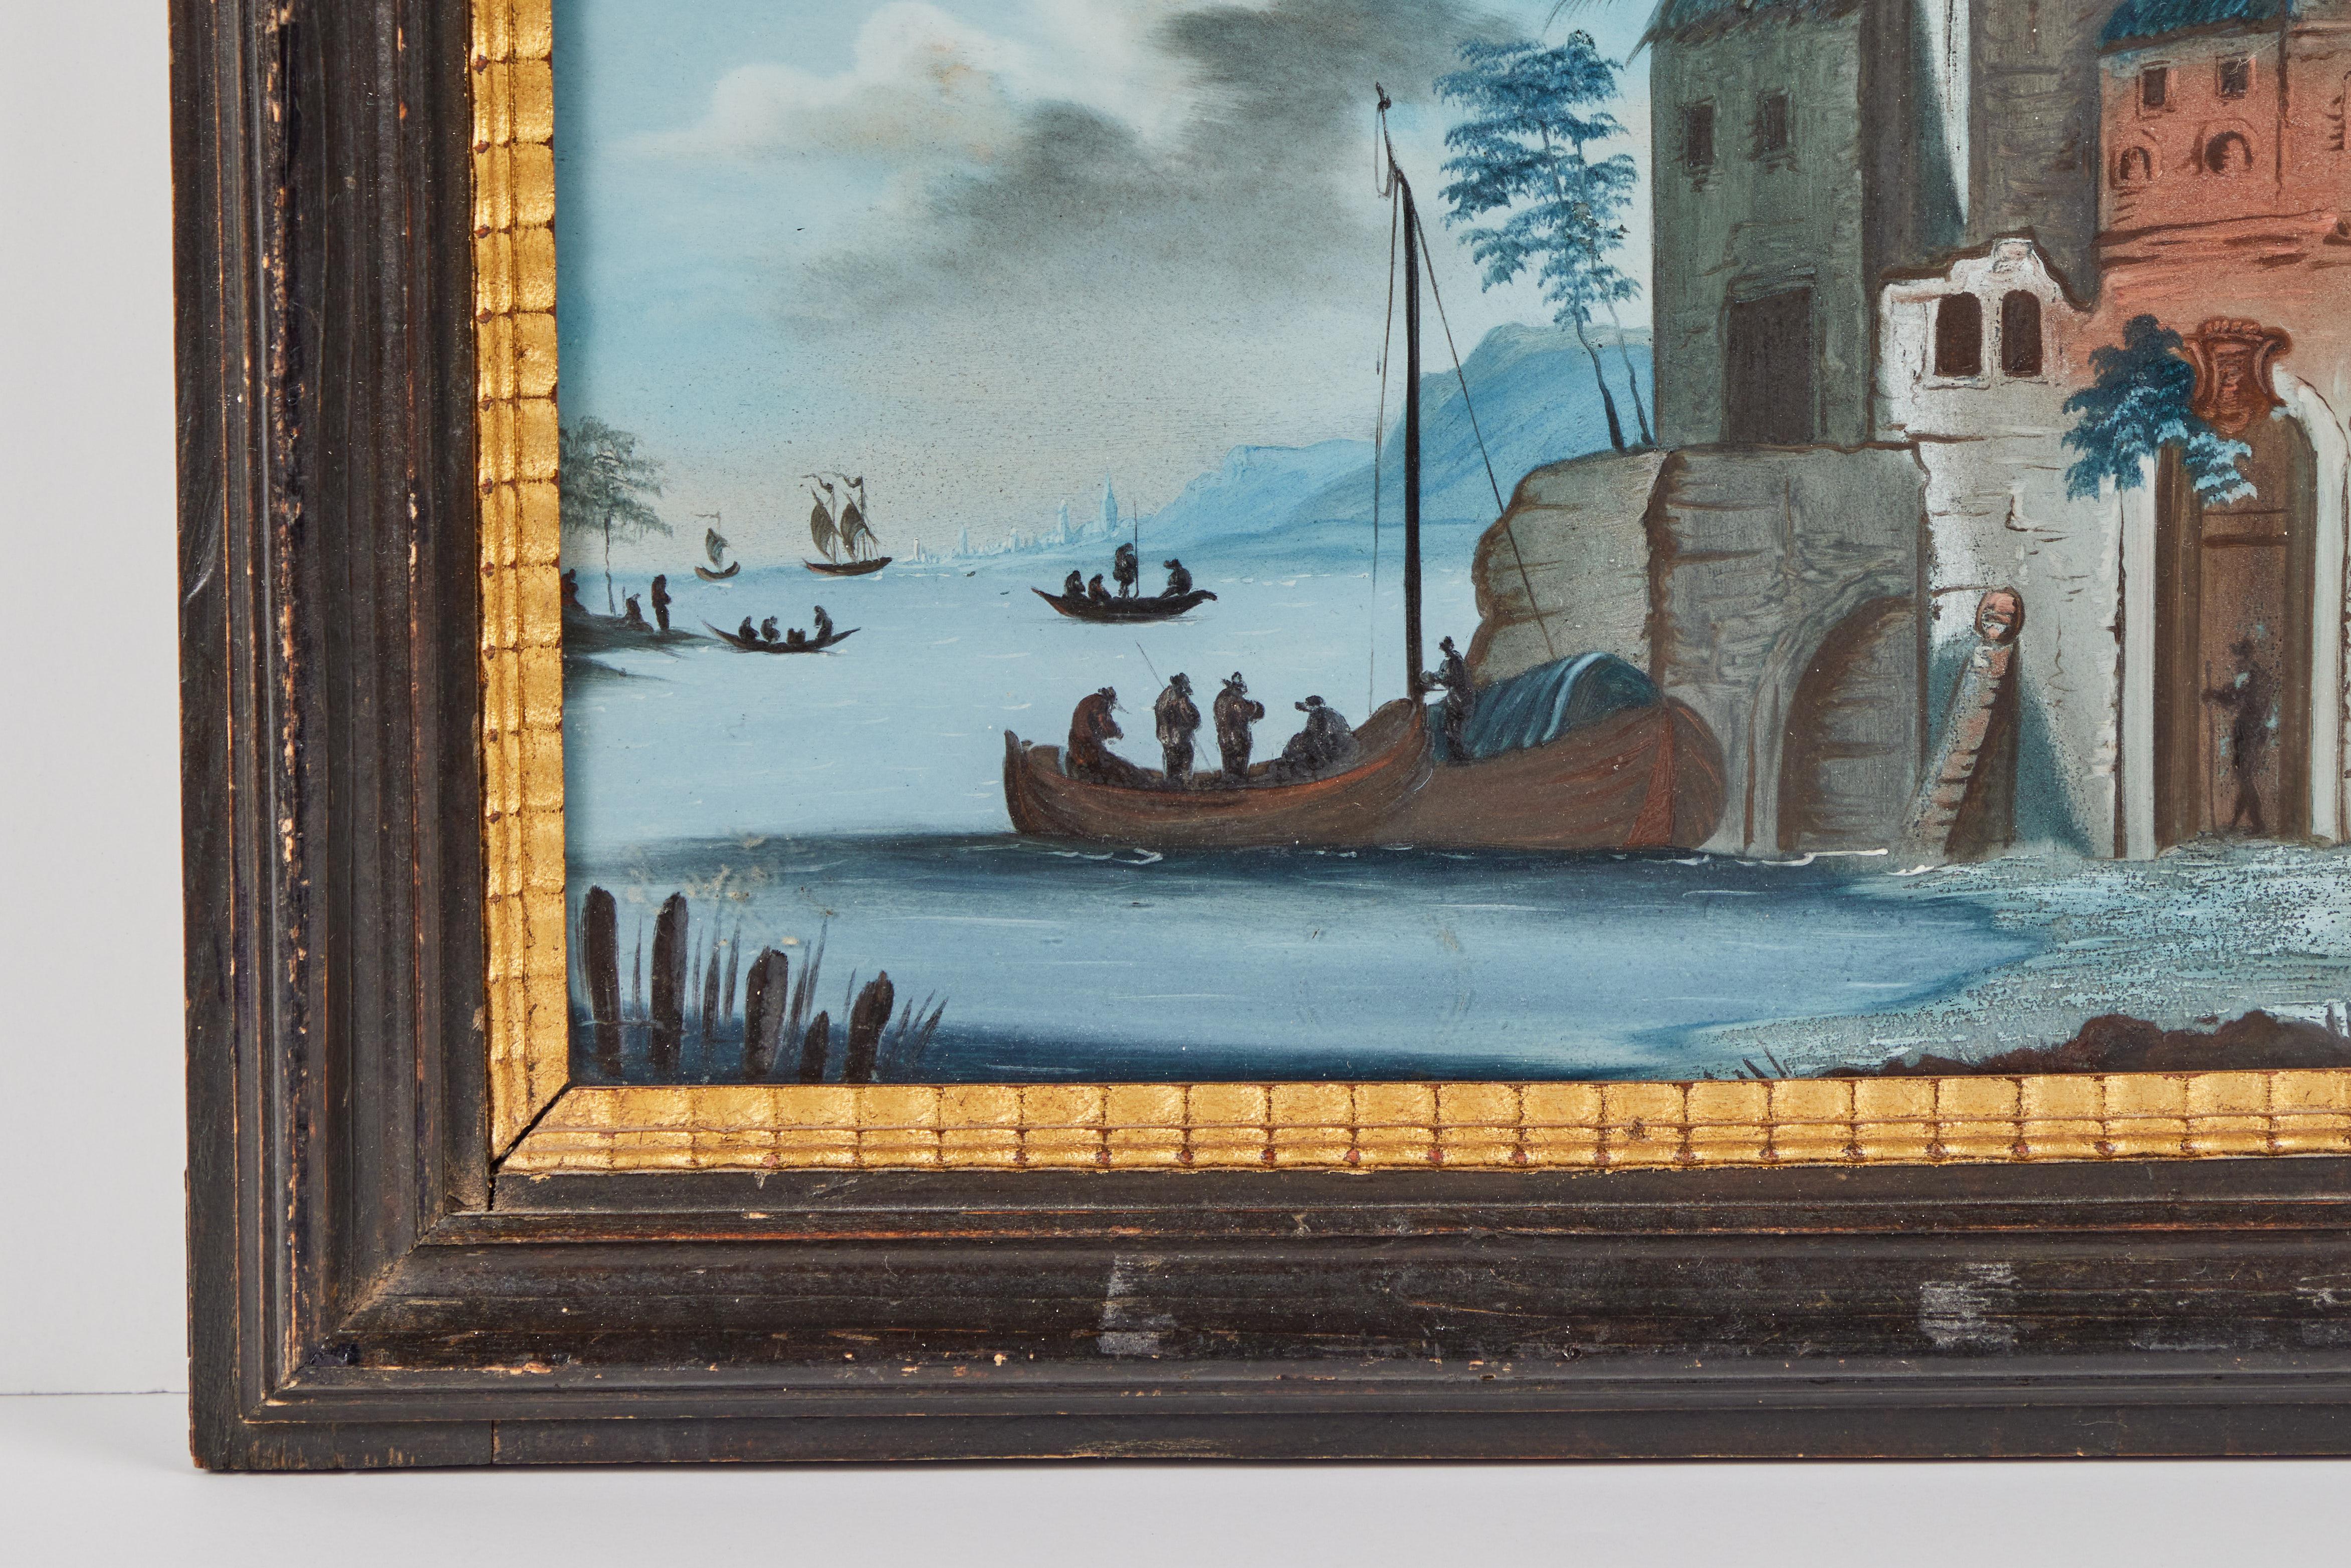 A rare pair of mated, hand-painted, verre églomisé, 17th c. Dutch harbor scenes featuring figures, a variety of boats, and foreground buildings. Each held in antique, hand-carved, parcel gilt frames.